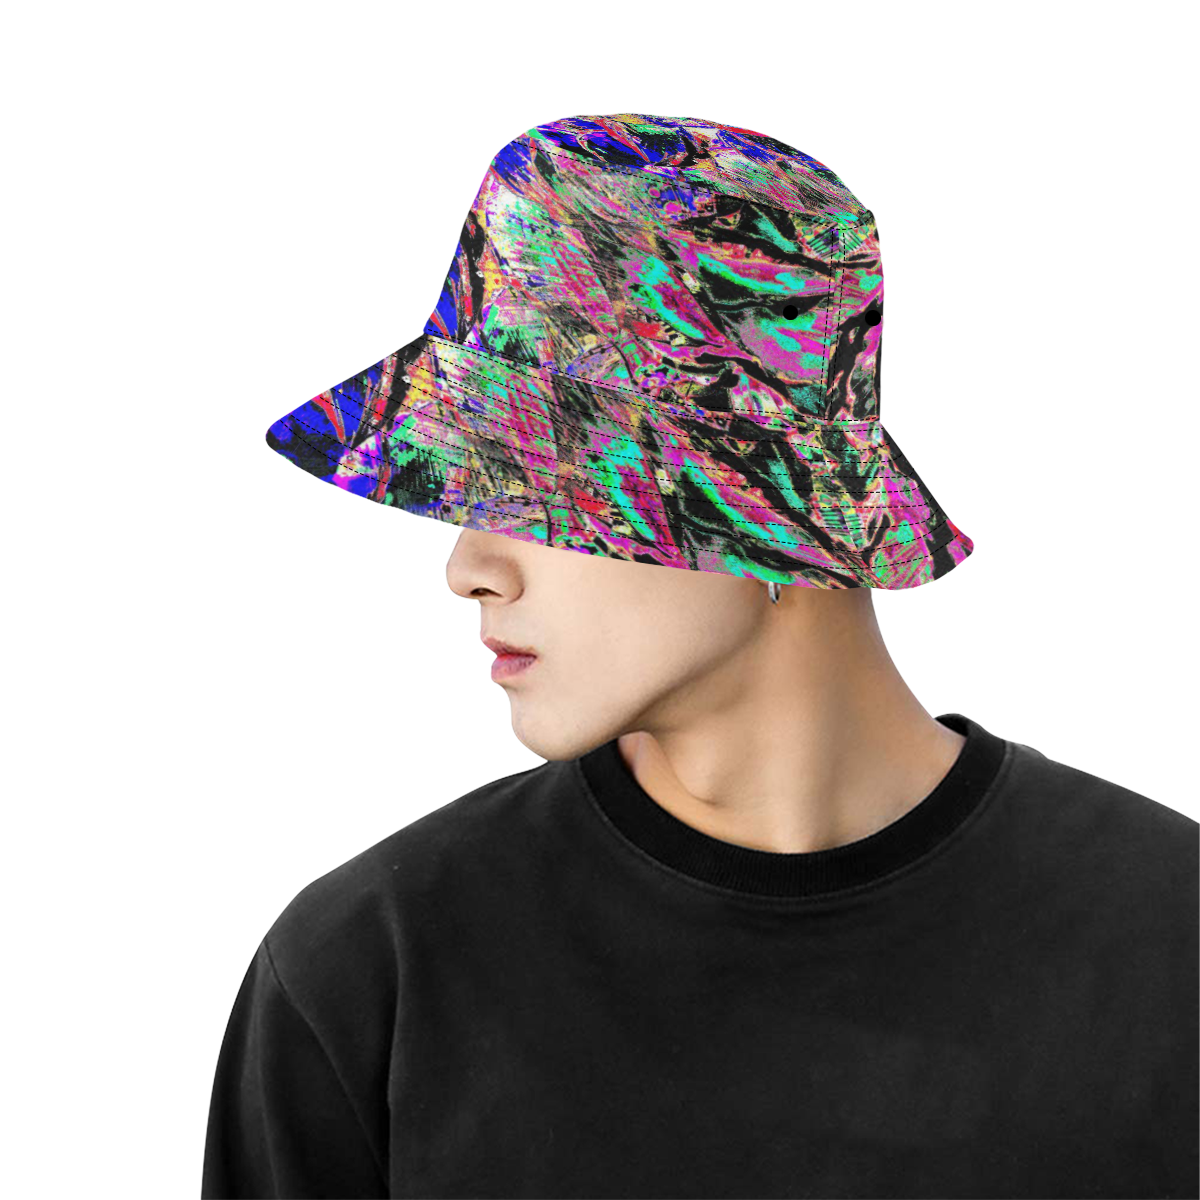 wheelVibe2_8500 78 low low low All Over Print Bucket Hat for Men